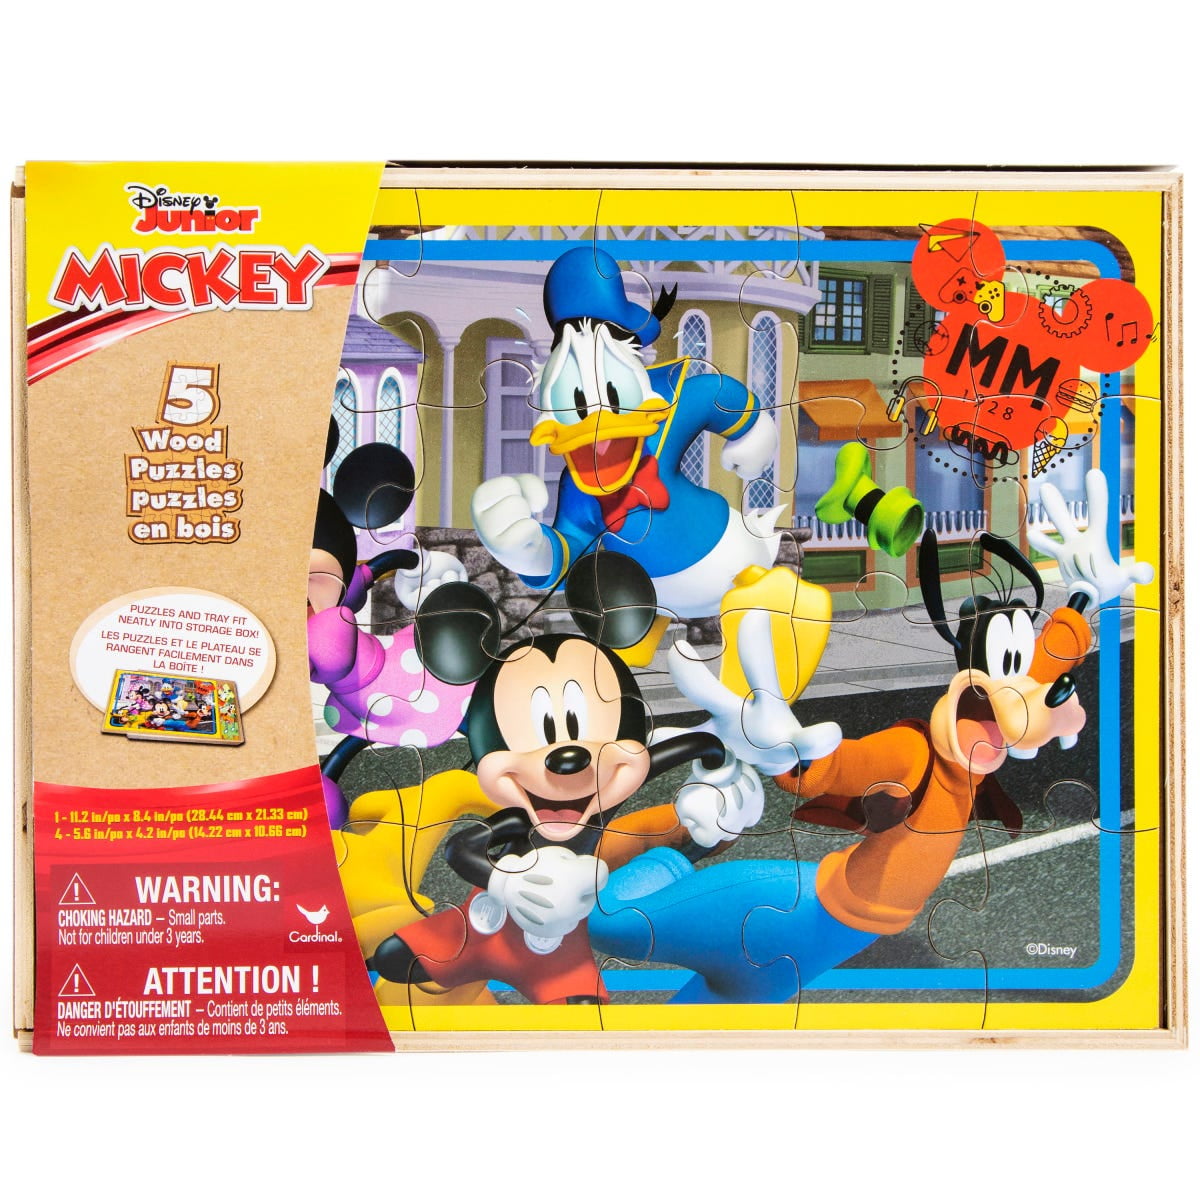 Disney Junior Mickey Mouse 5 Wood Puzzle